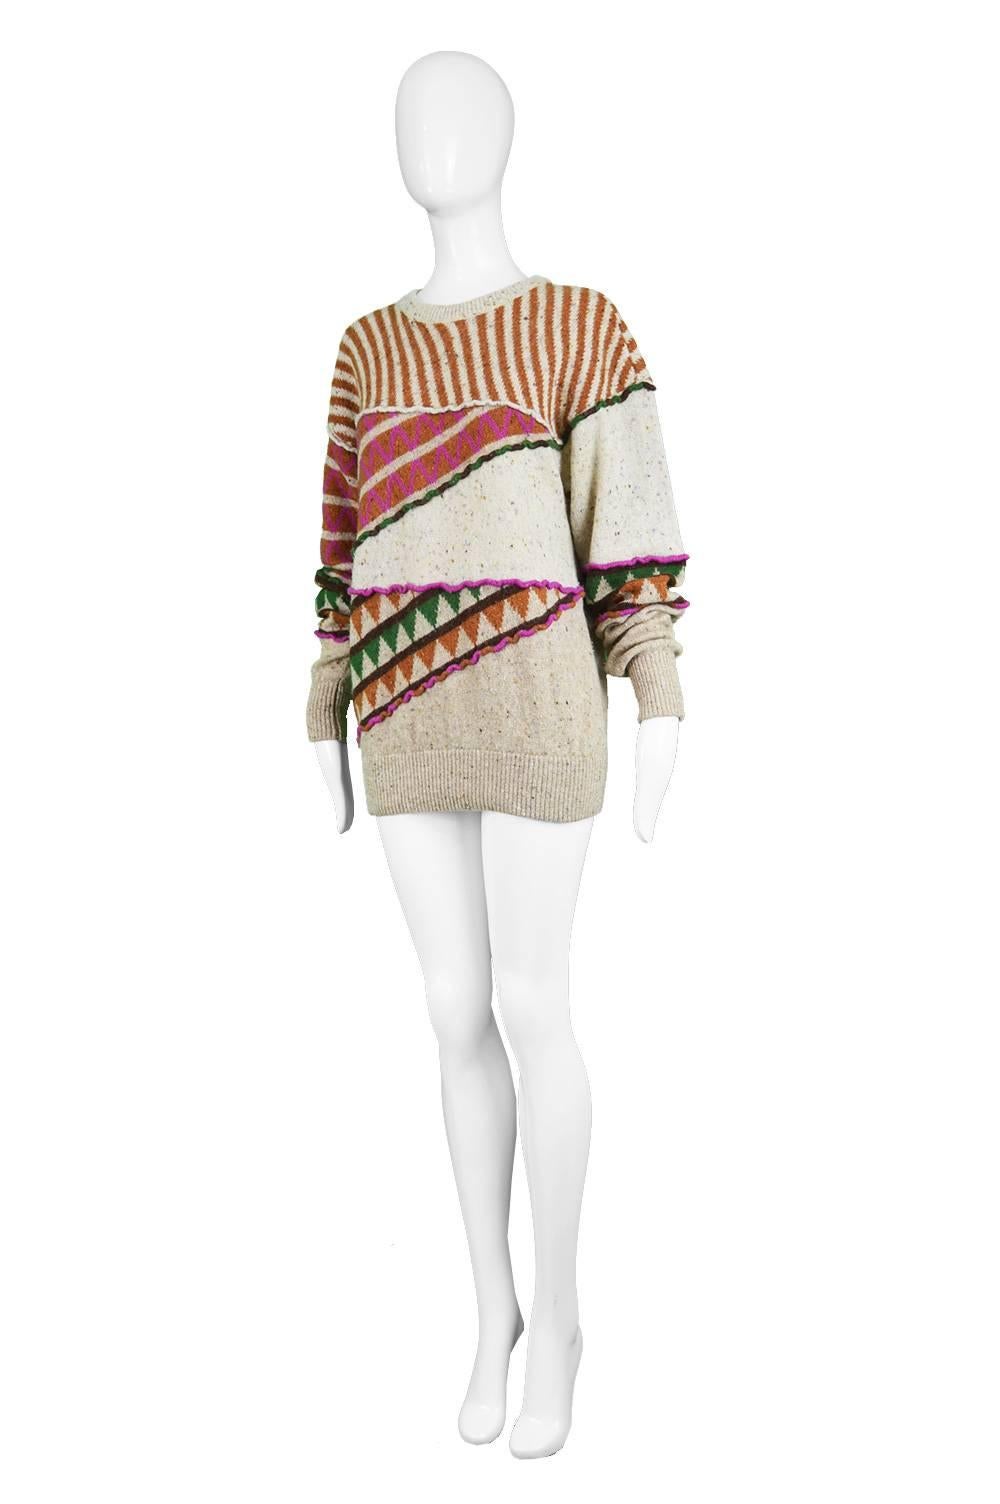 Beige Issey Miyake Vintage 1980s Intarsia Knit Textured Slouchy Wool Tribal Sweater